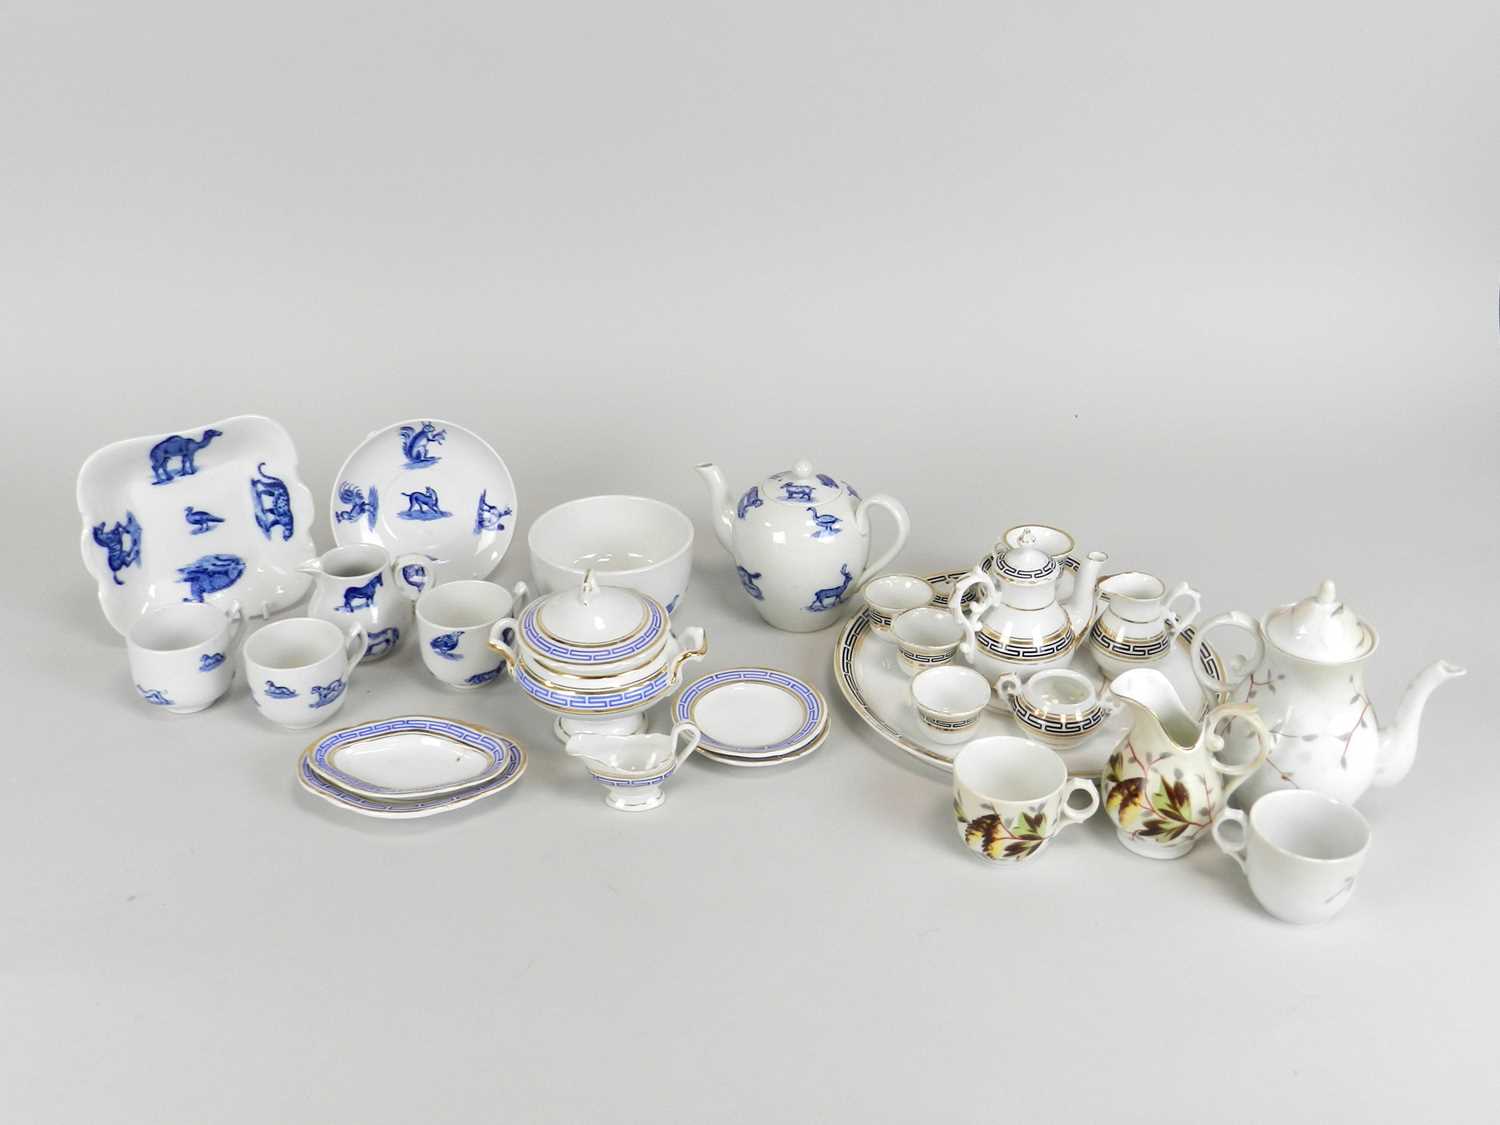 Copeland Spode child's tea service, child's dinner service and two further services